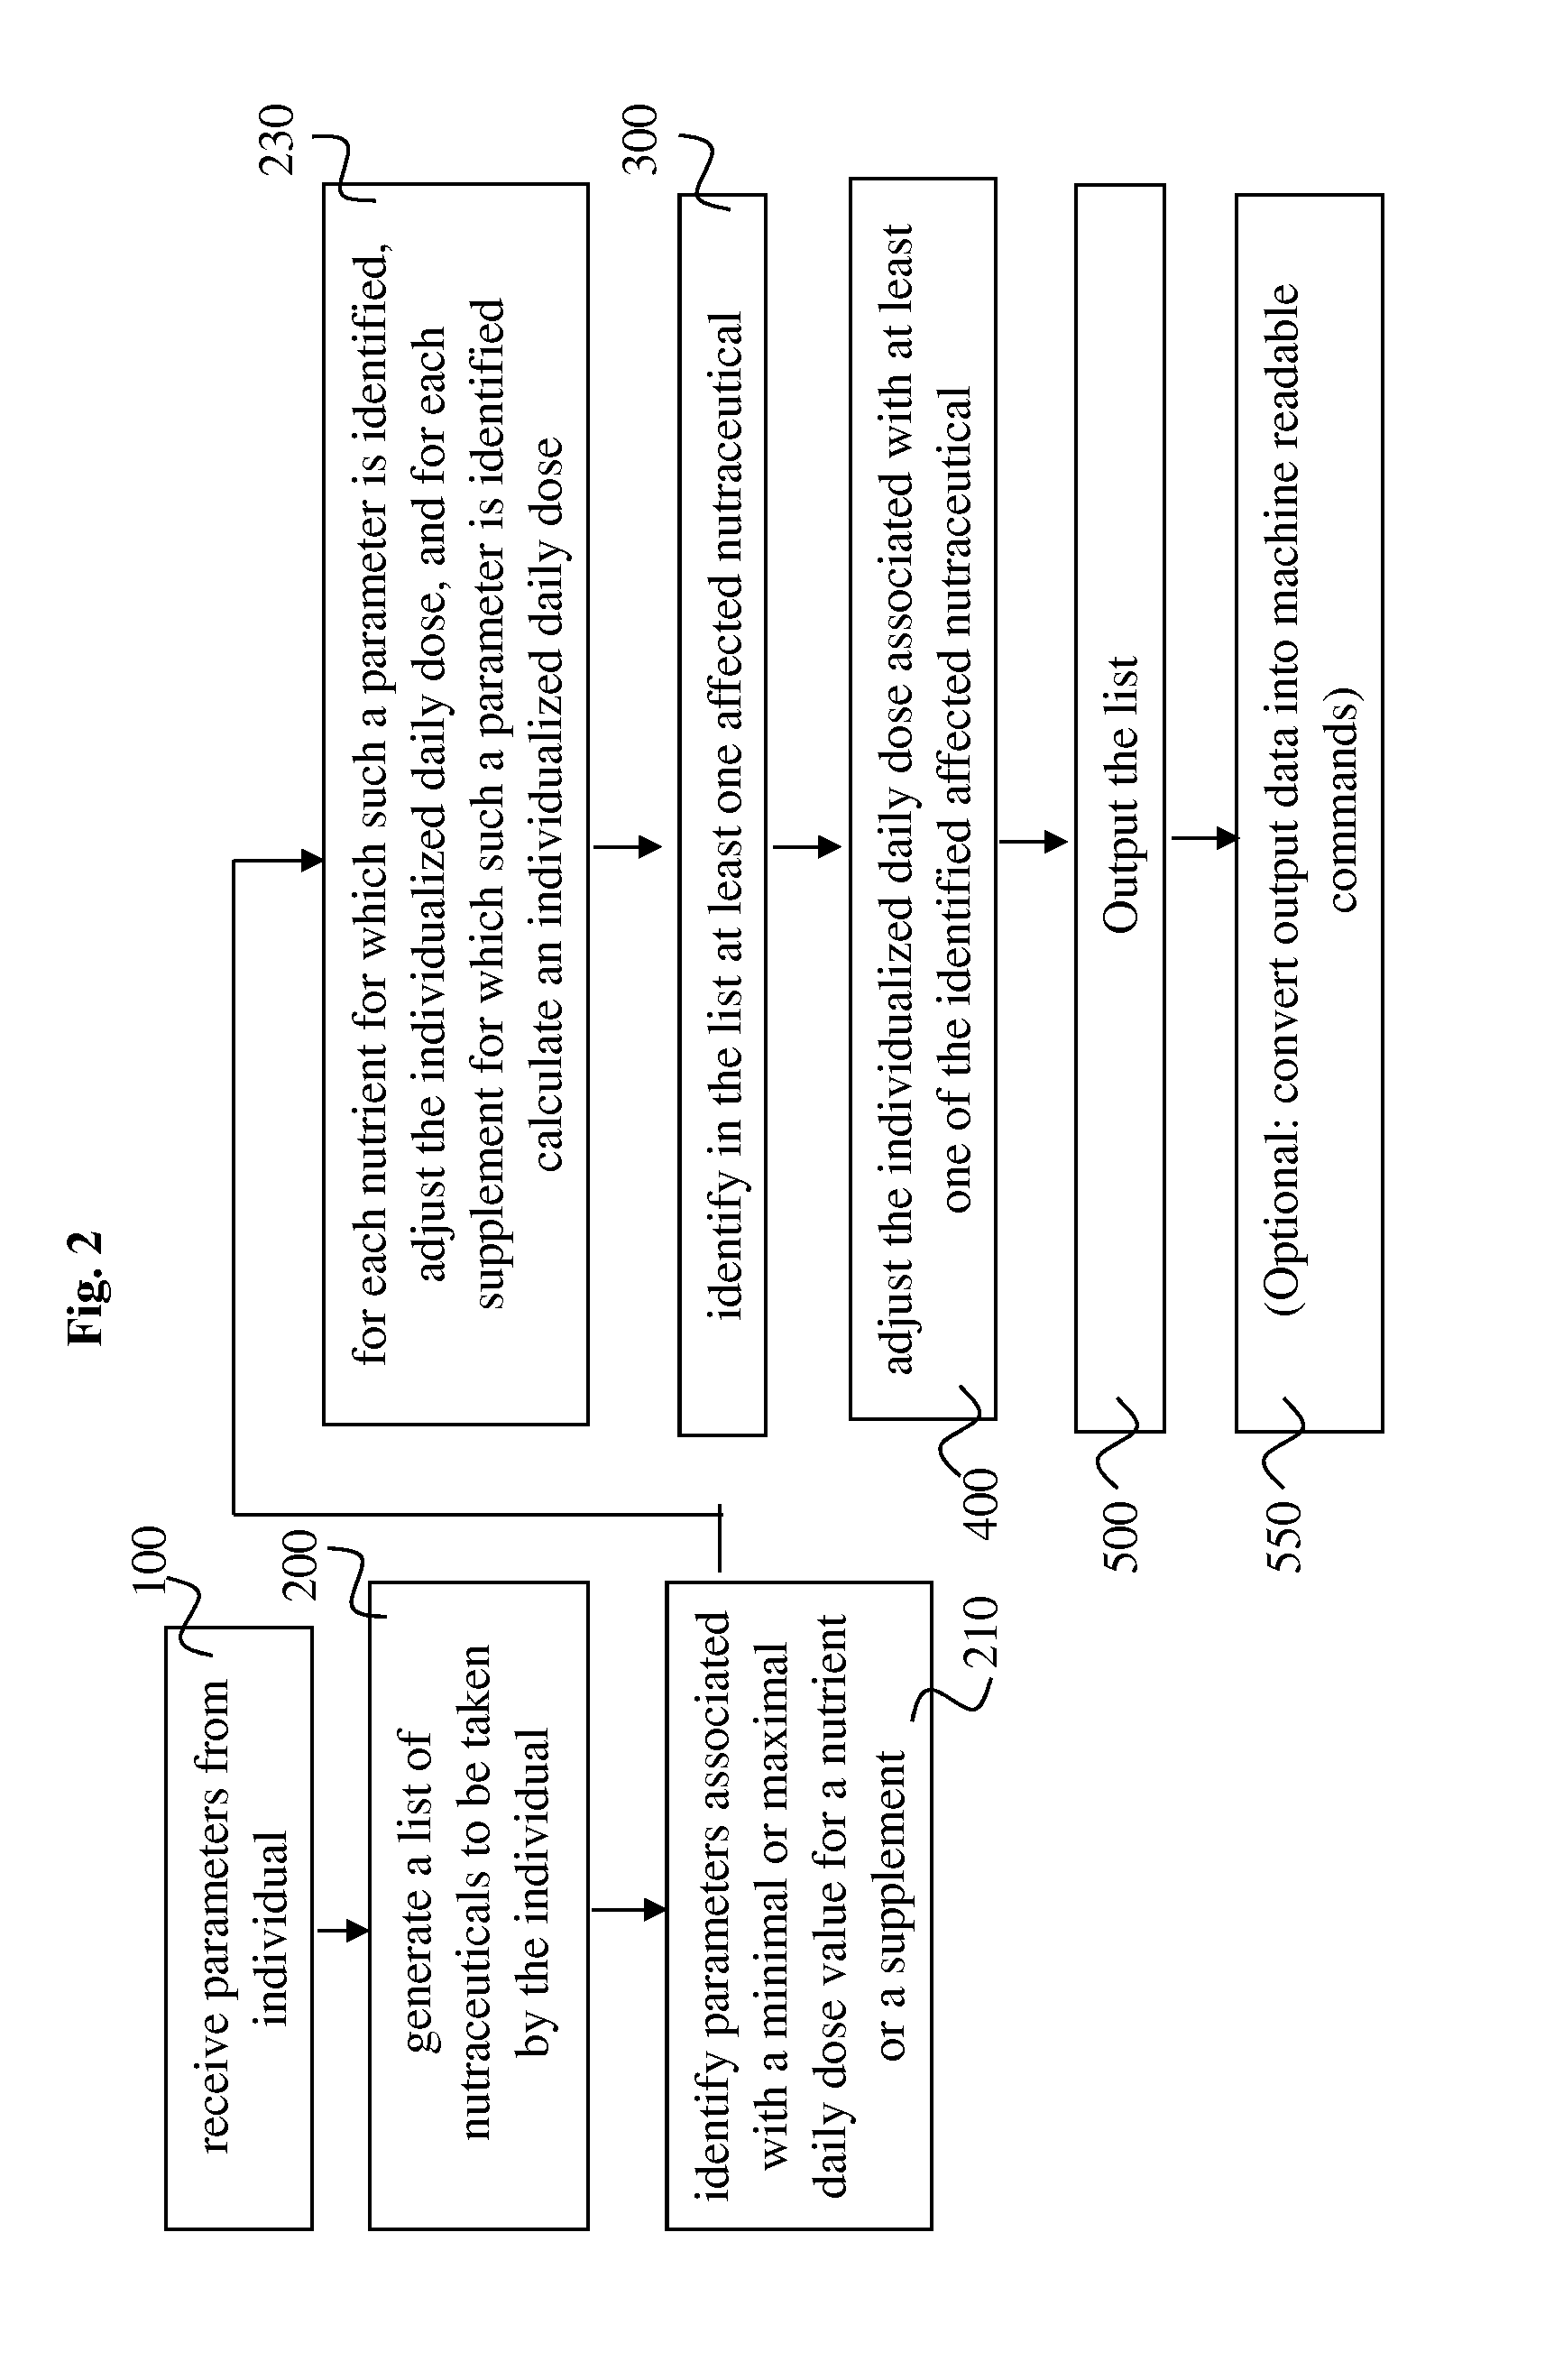 Methods for providing a personalized list of dietary nutrients and supplements